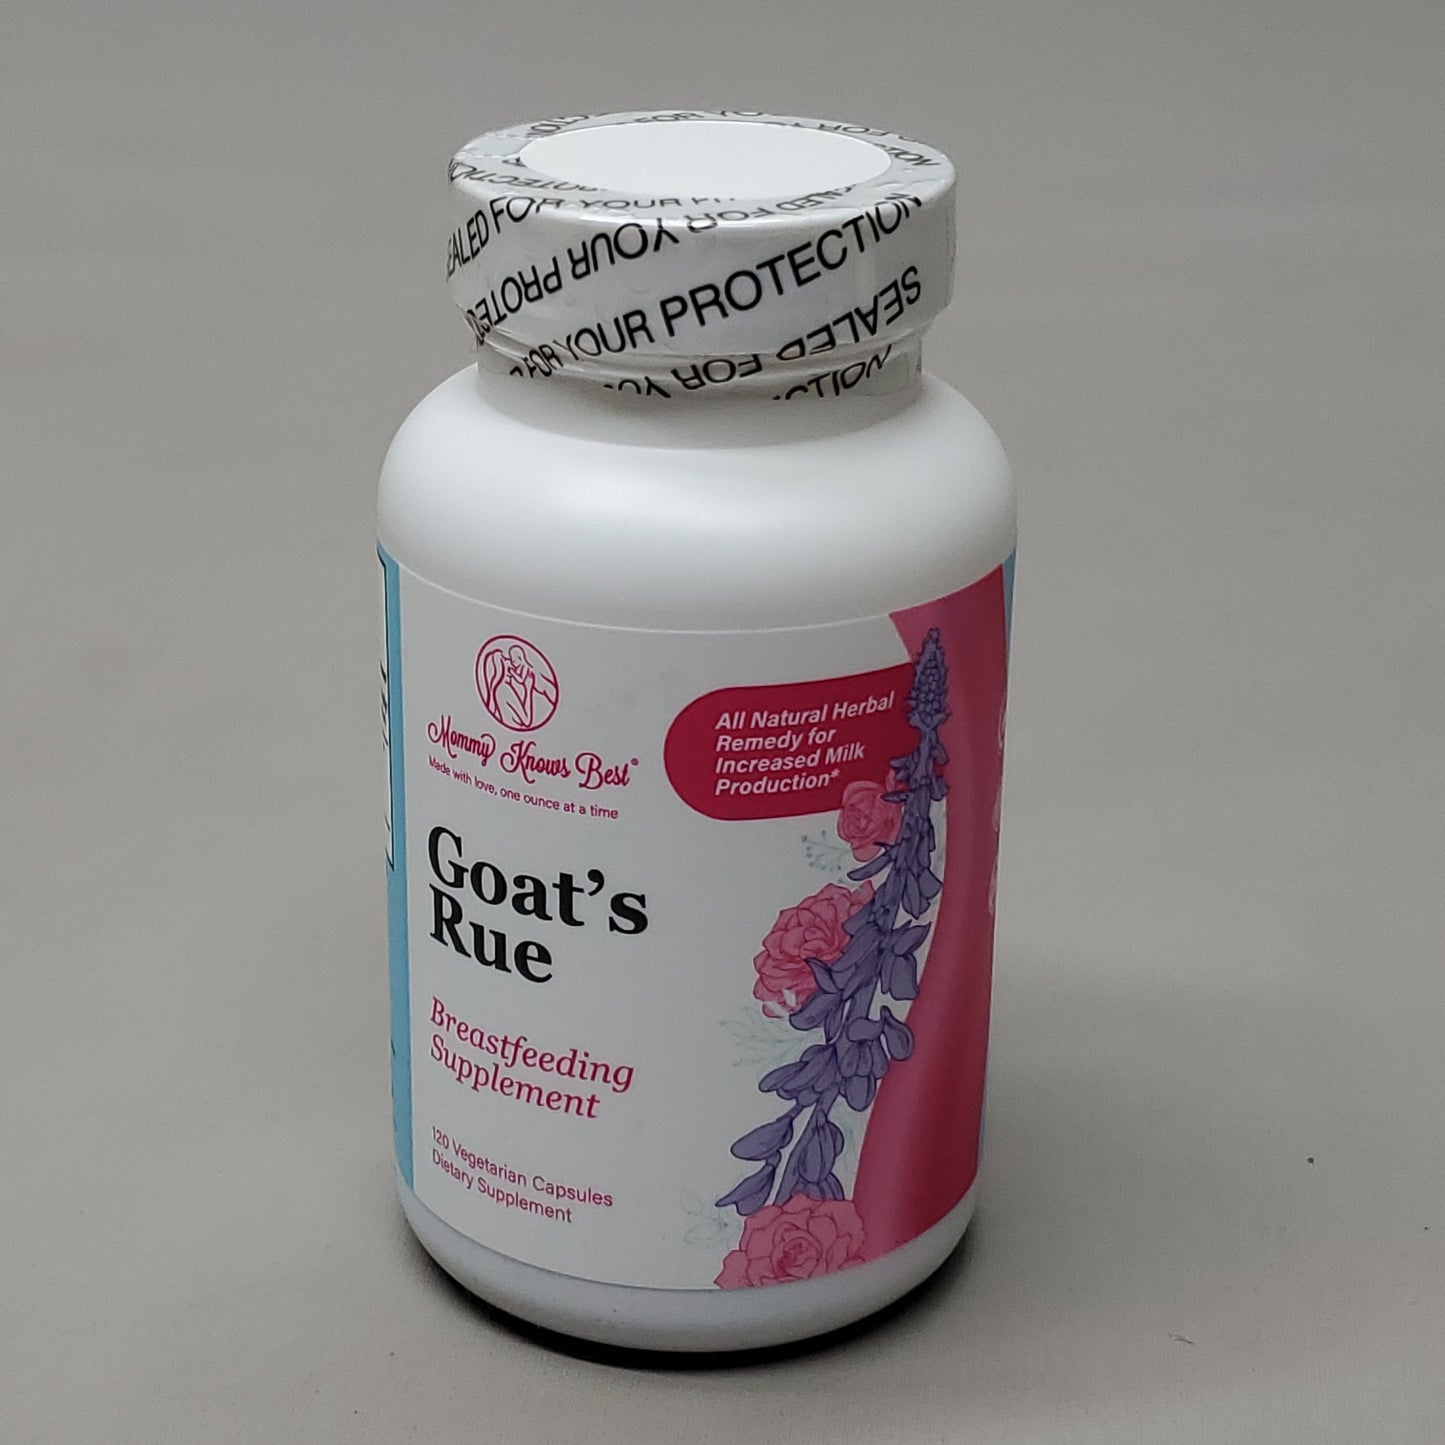 MOMMY KNOWS BEST 6-PACK! Goat's Rue Breastfeeding Supplement 120 Capsules 720 Total Exp 10/23